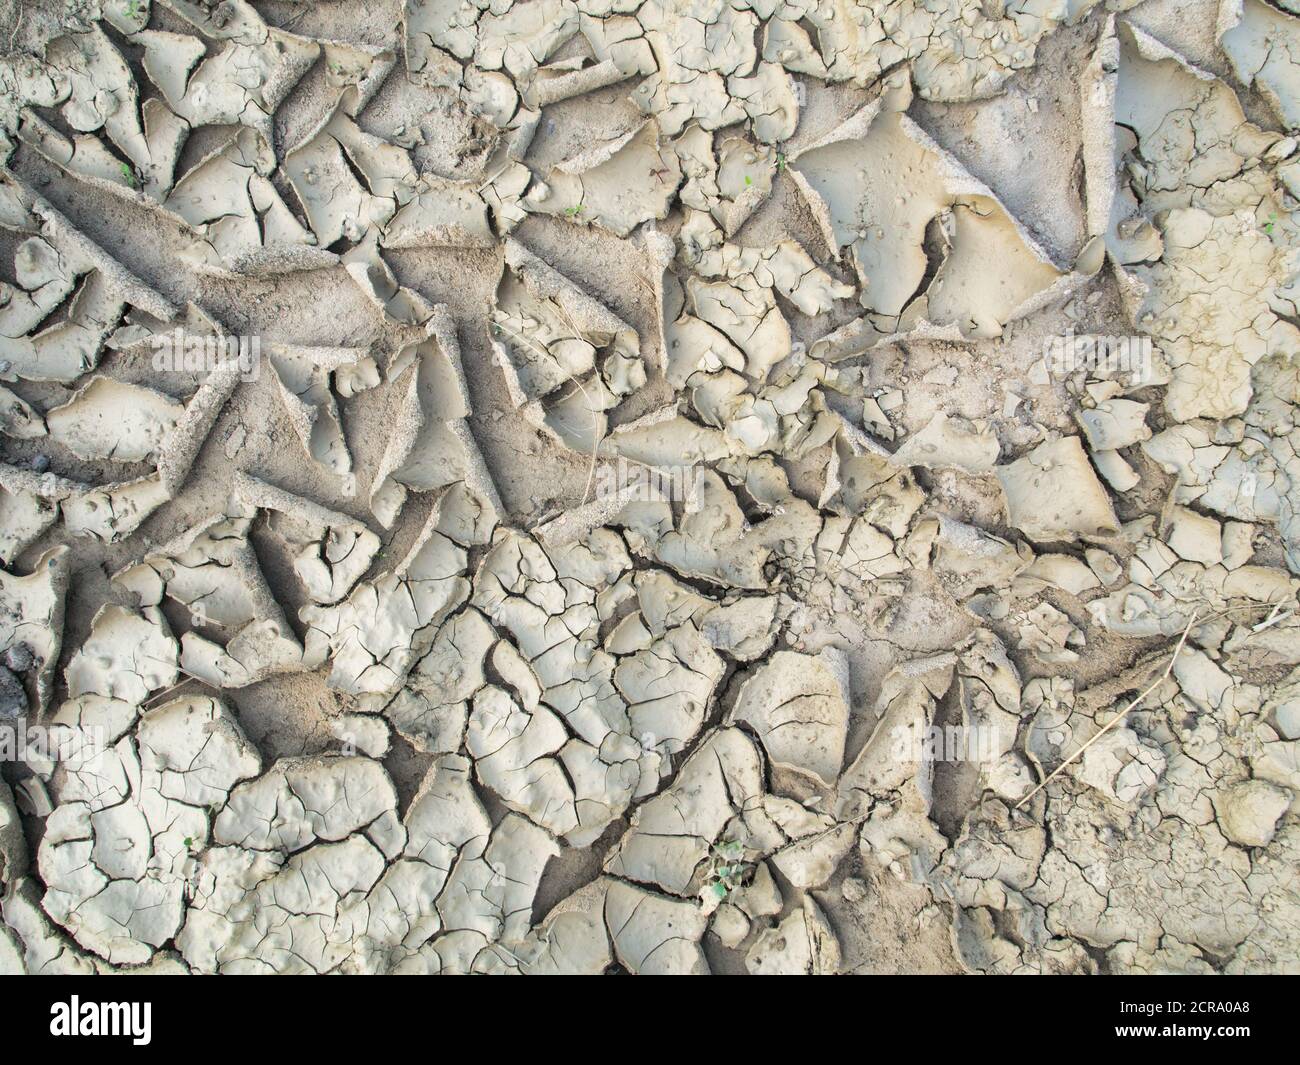 Dried out clay soil, cracks in the ground Stock Photo